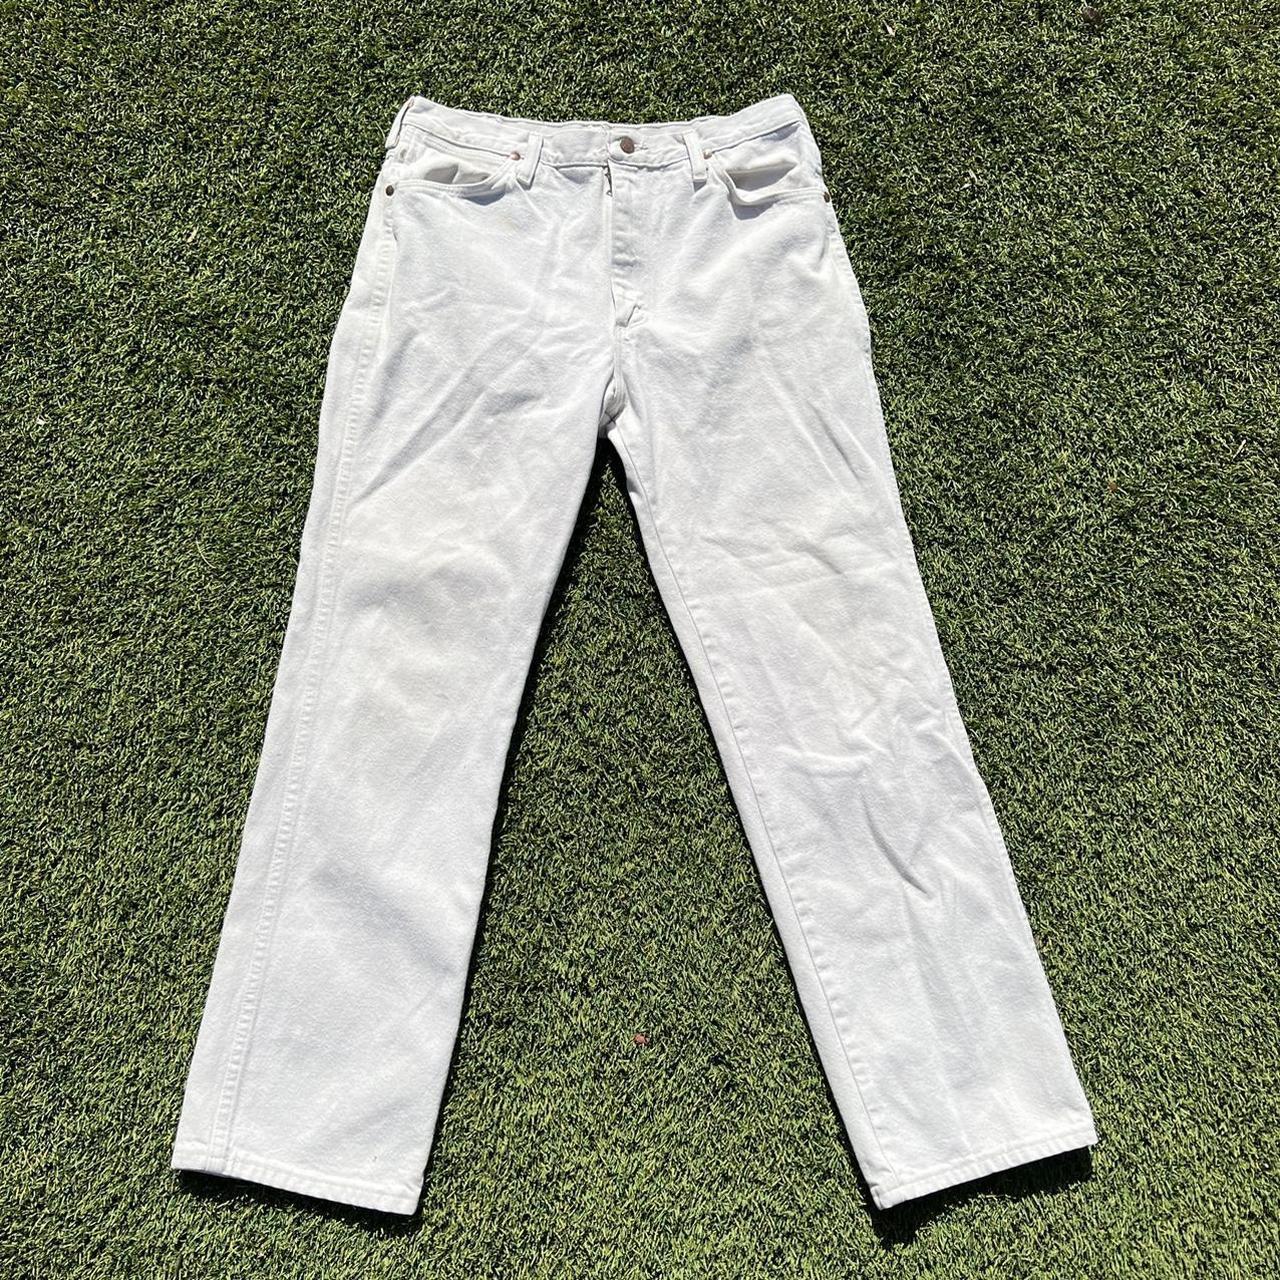 Product Image 2 - Vintage 80s White Wrangler Jeans
No